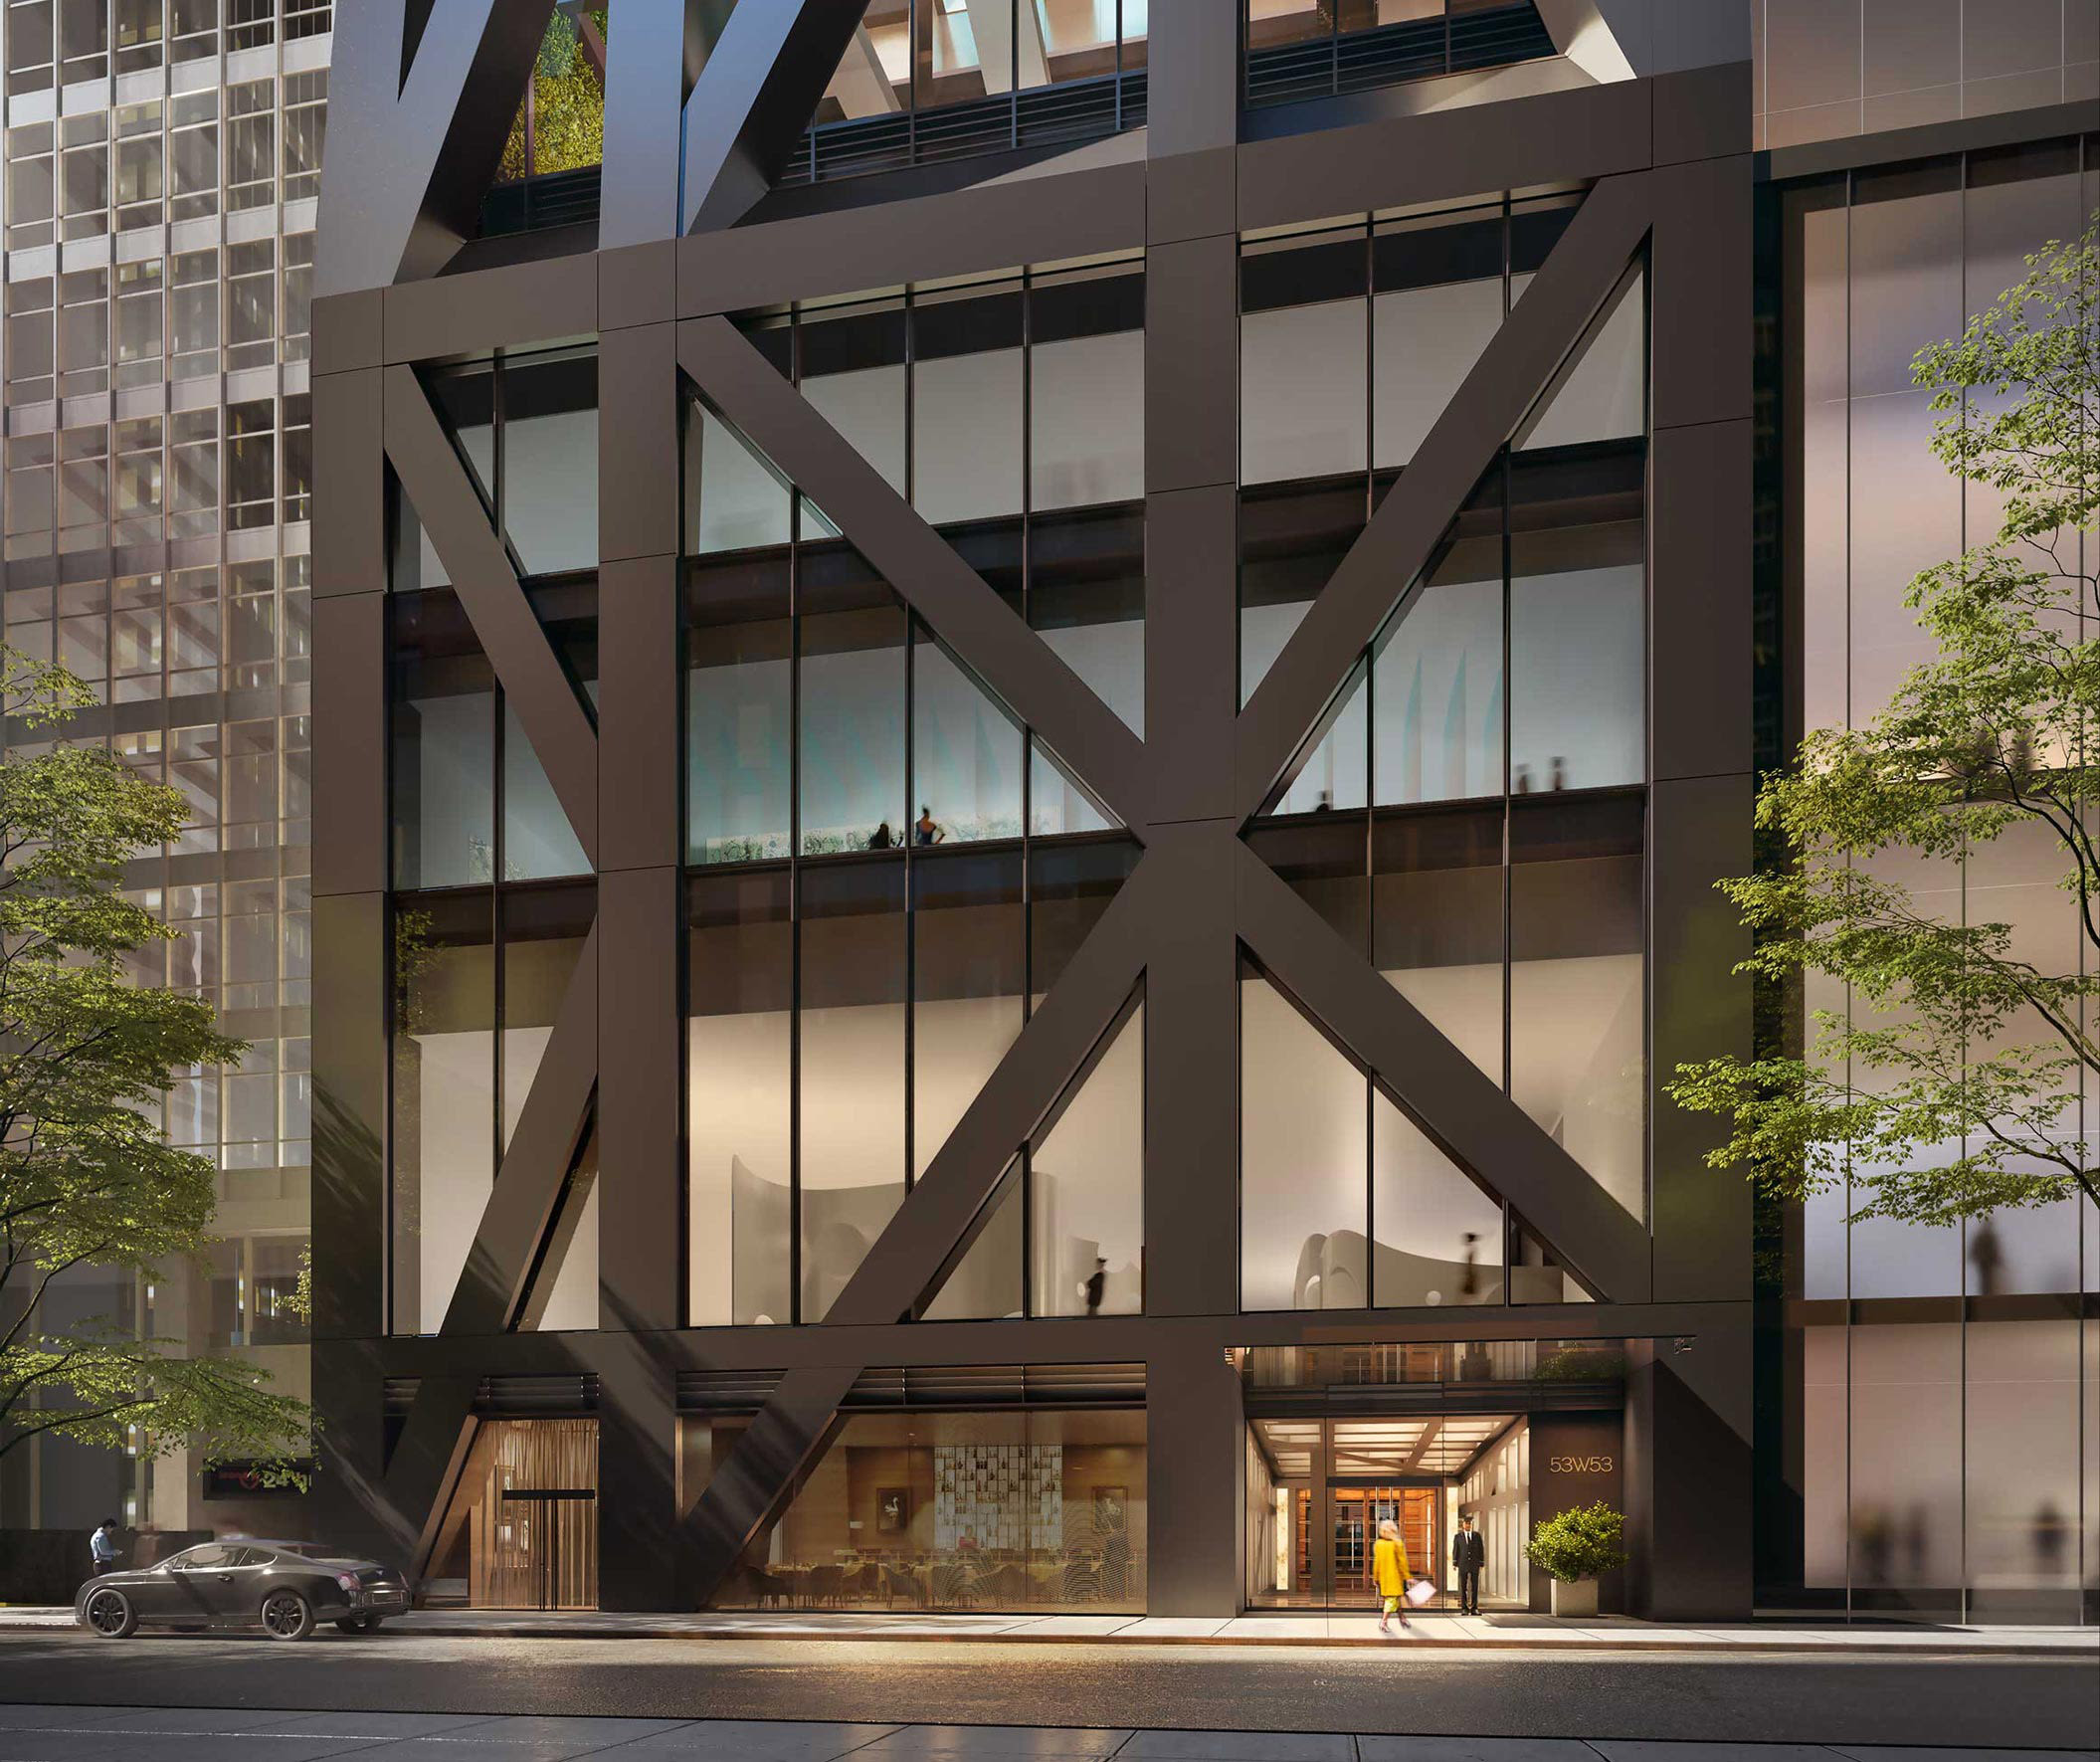 53 WEST 53 BRANDED RESIDENCES: WHERE ARCHITECTURAL MASTERY MEETS MANHATTAN LUXURY